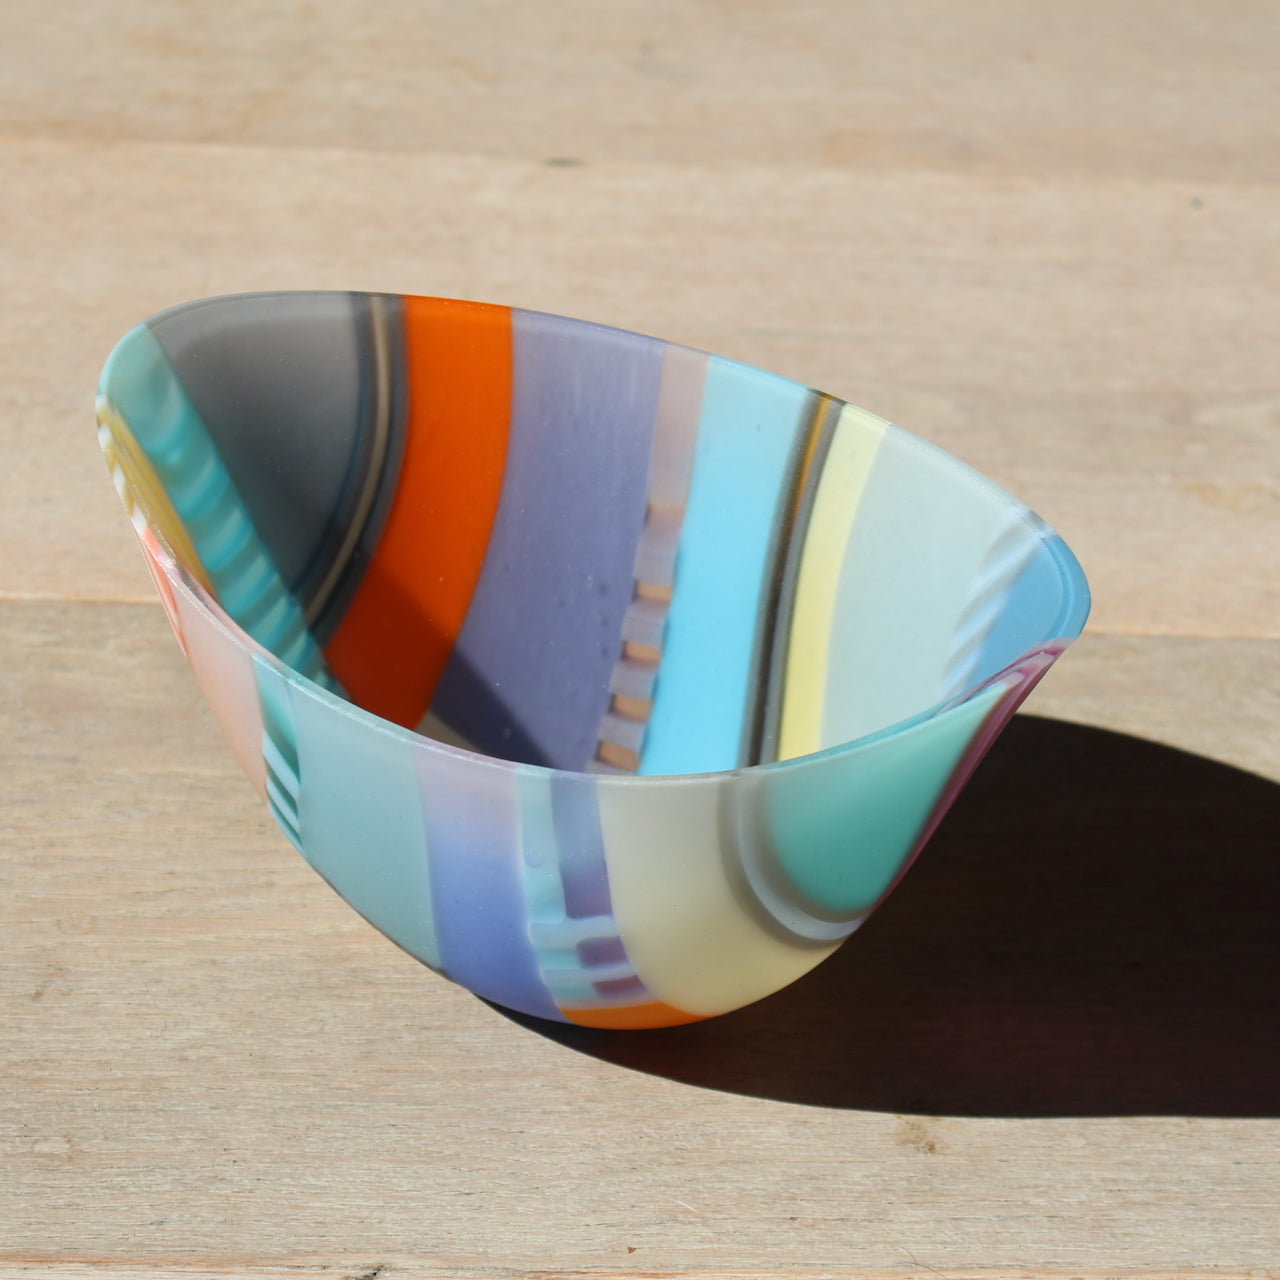 Beautiful oval shaped bowl by glass artist Ruth Shelley in tones of blue, orange, yellow and grey